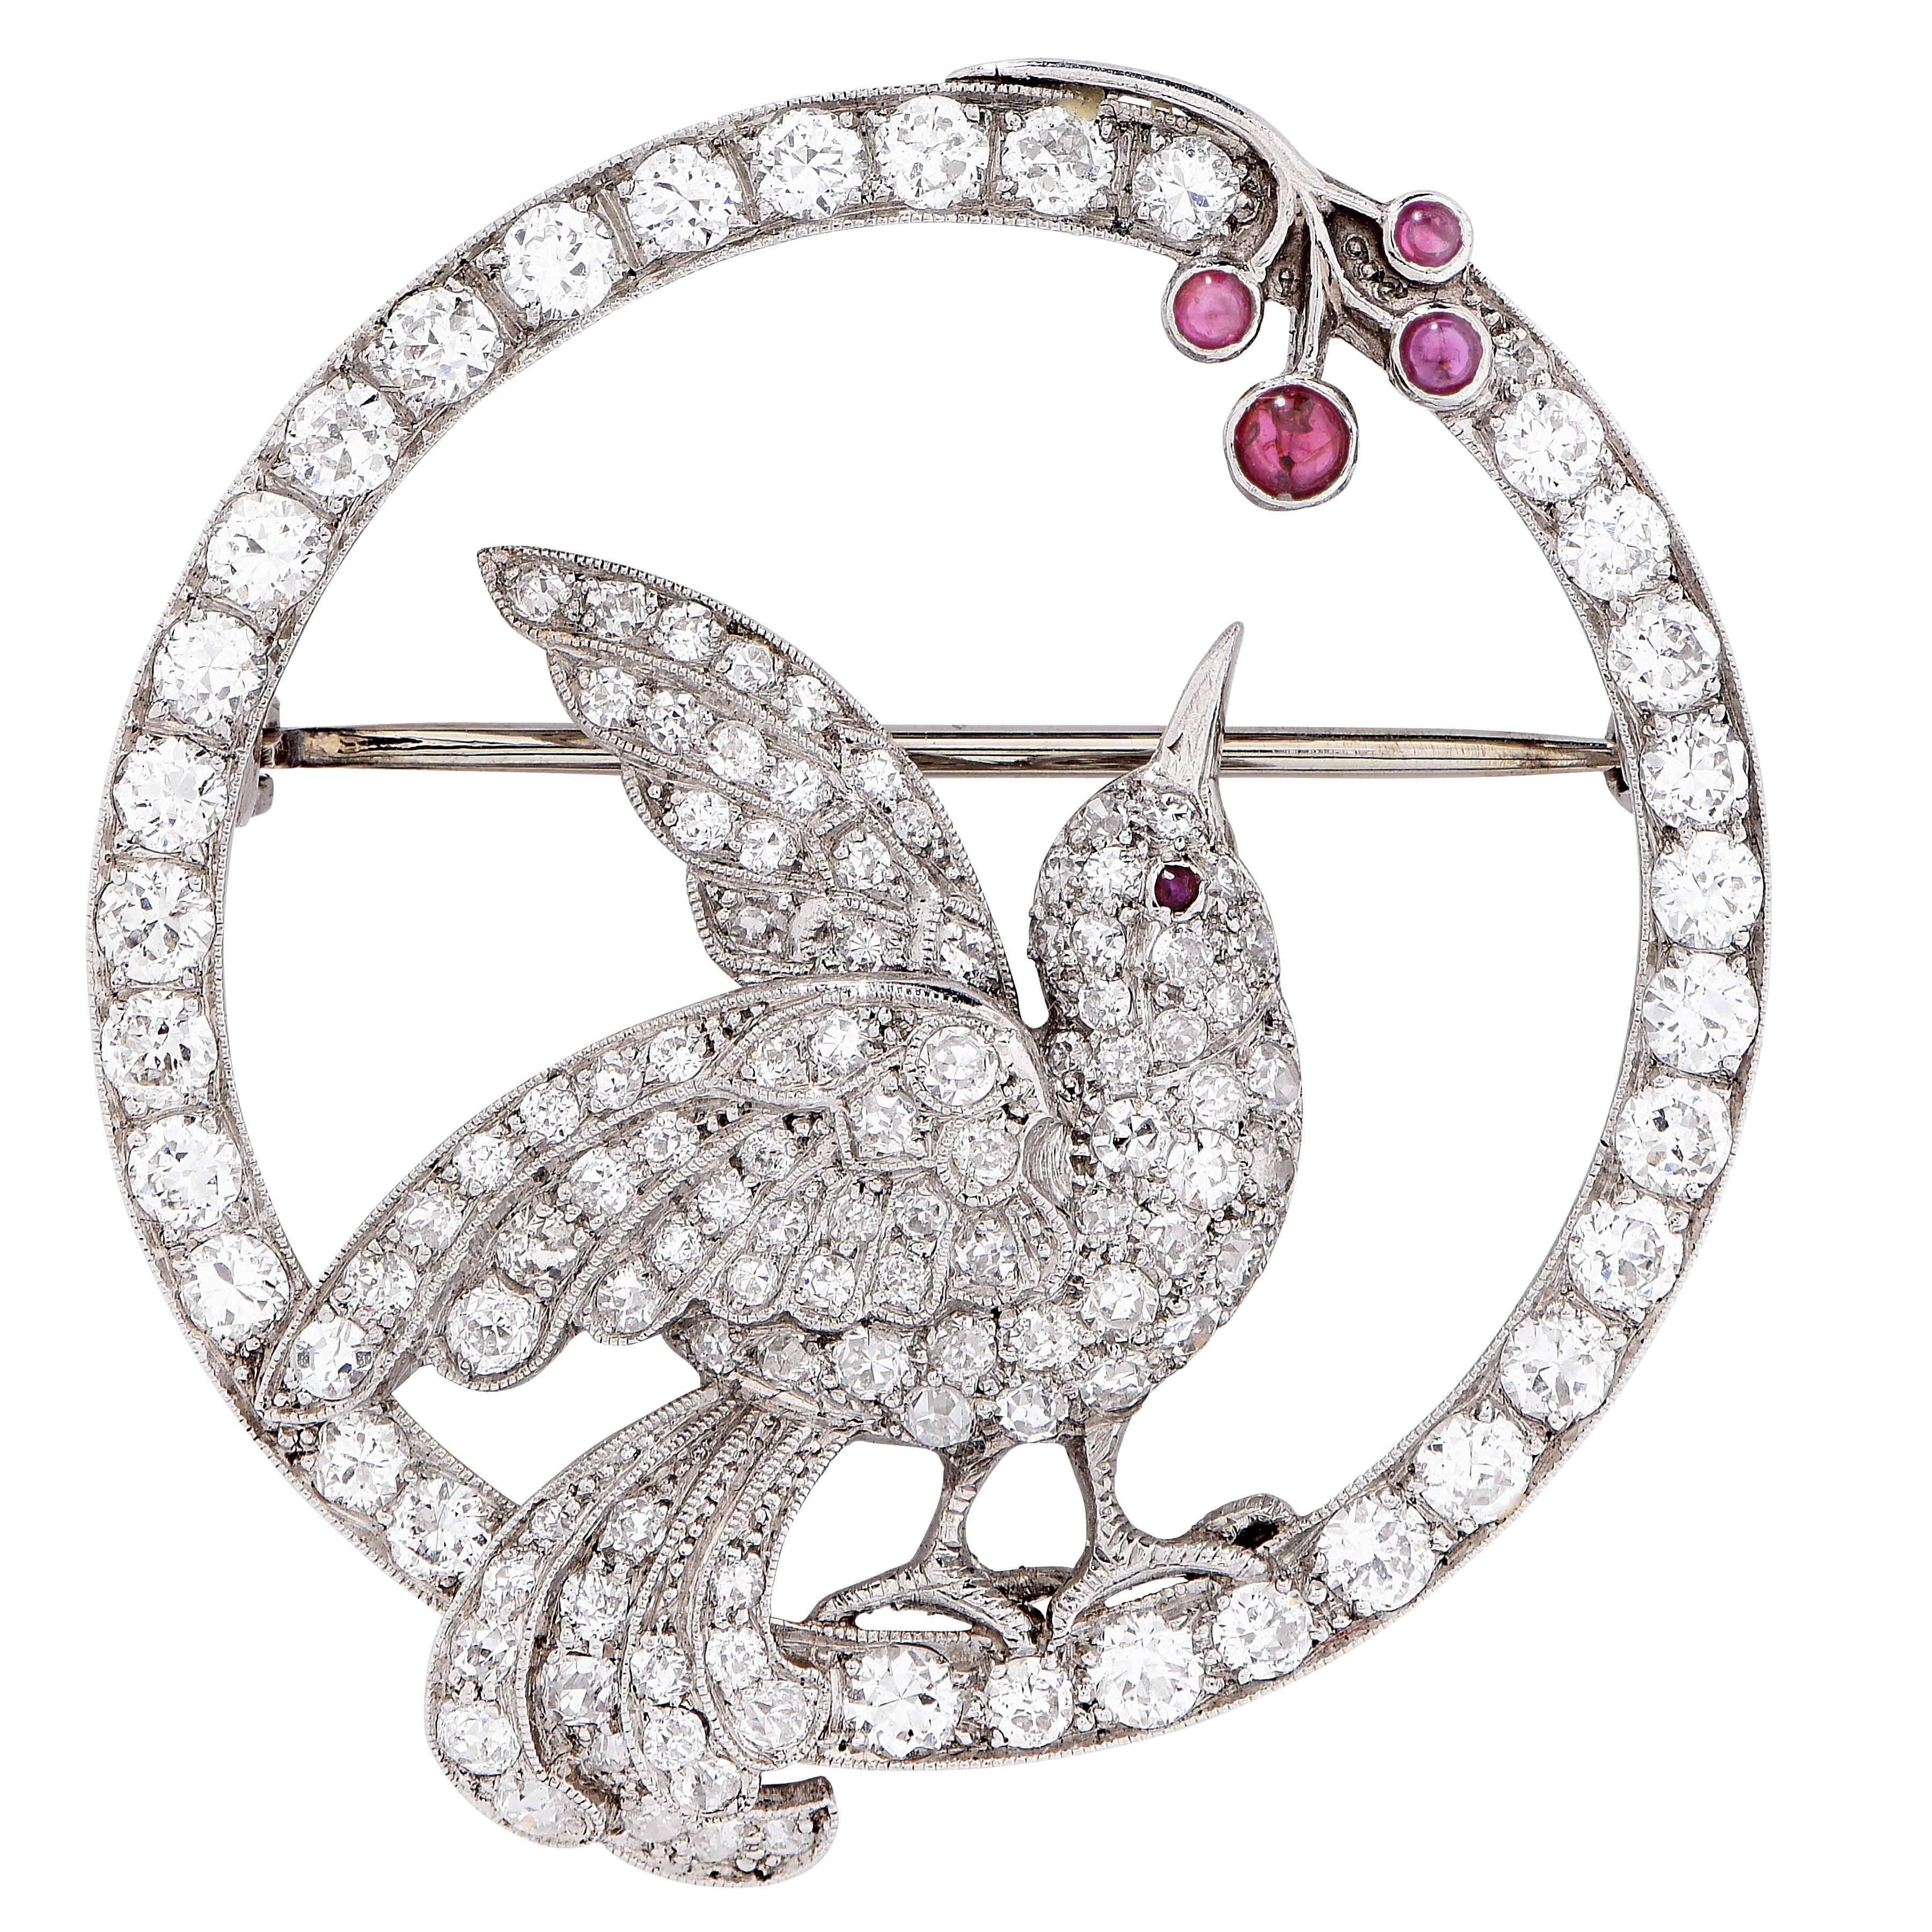 This gorgeous platinum brooch depicts a whimsical motif of a bird picking berries. The brooch is set with 126 Old European cut, and single cut diamonds weighing approximately 3.50 carats, and 5 cabochon rubies.

Metal Type: Platinum
Metal Weight: